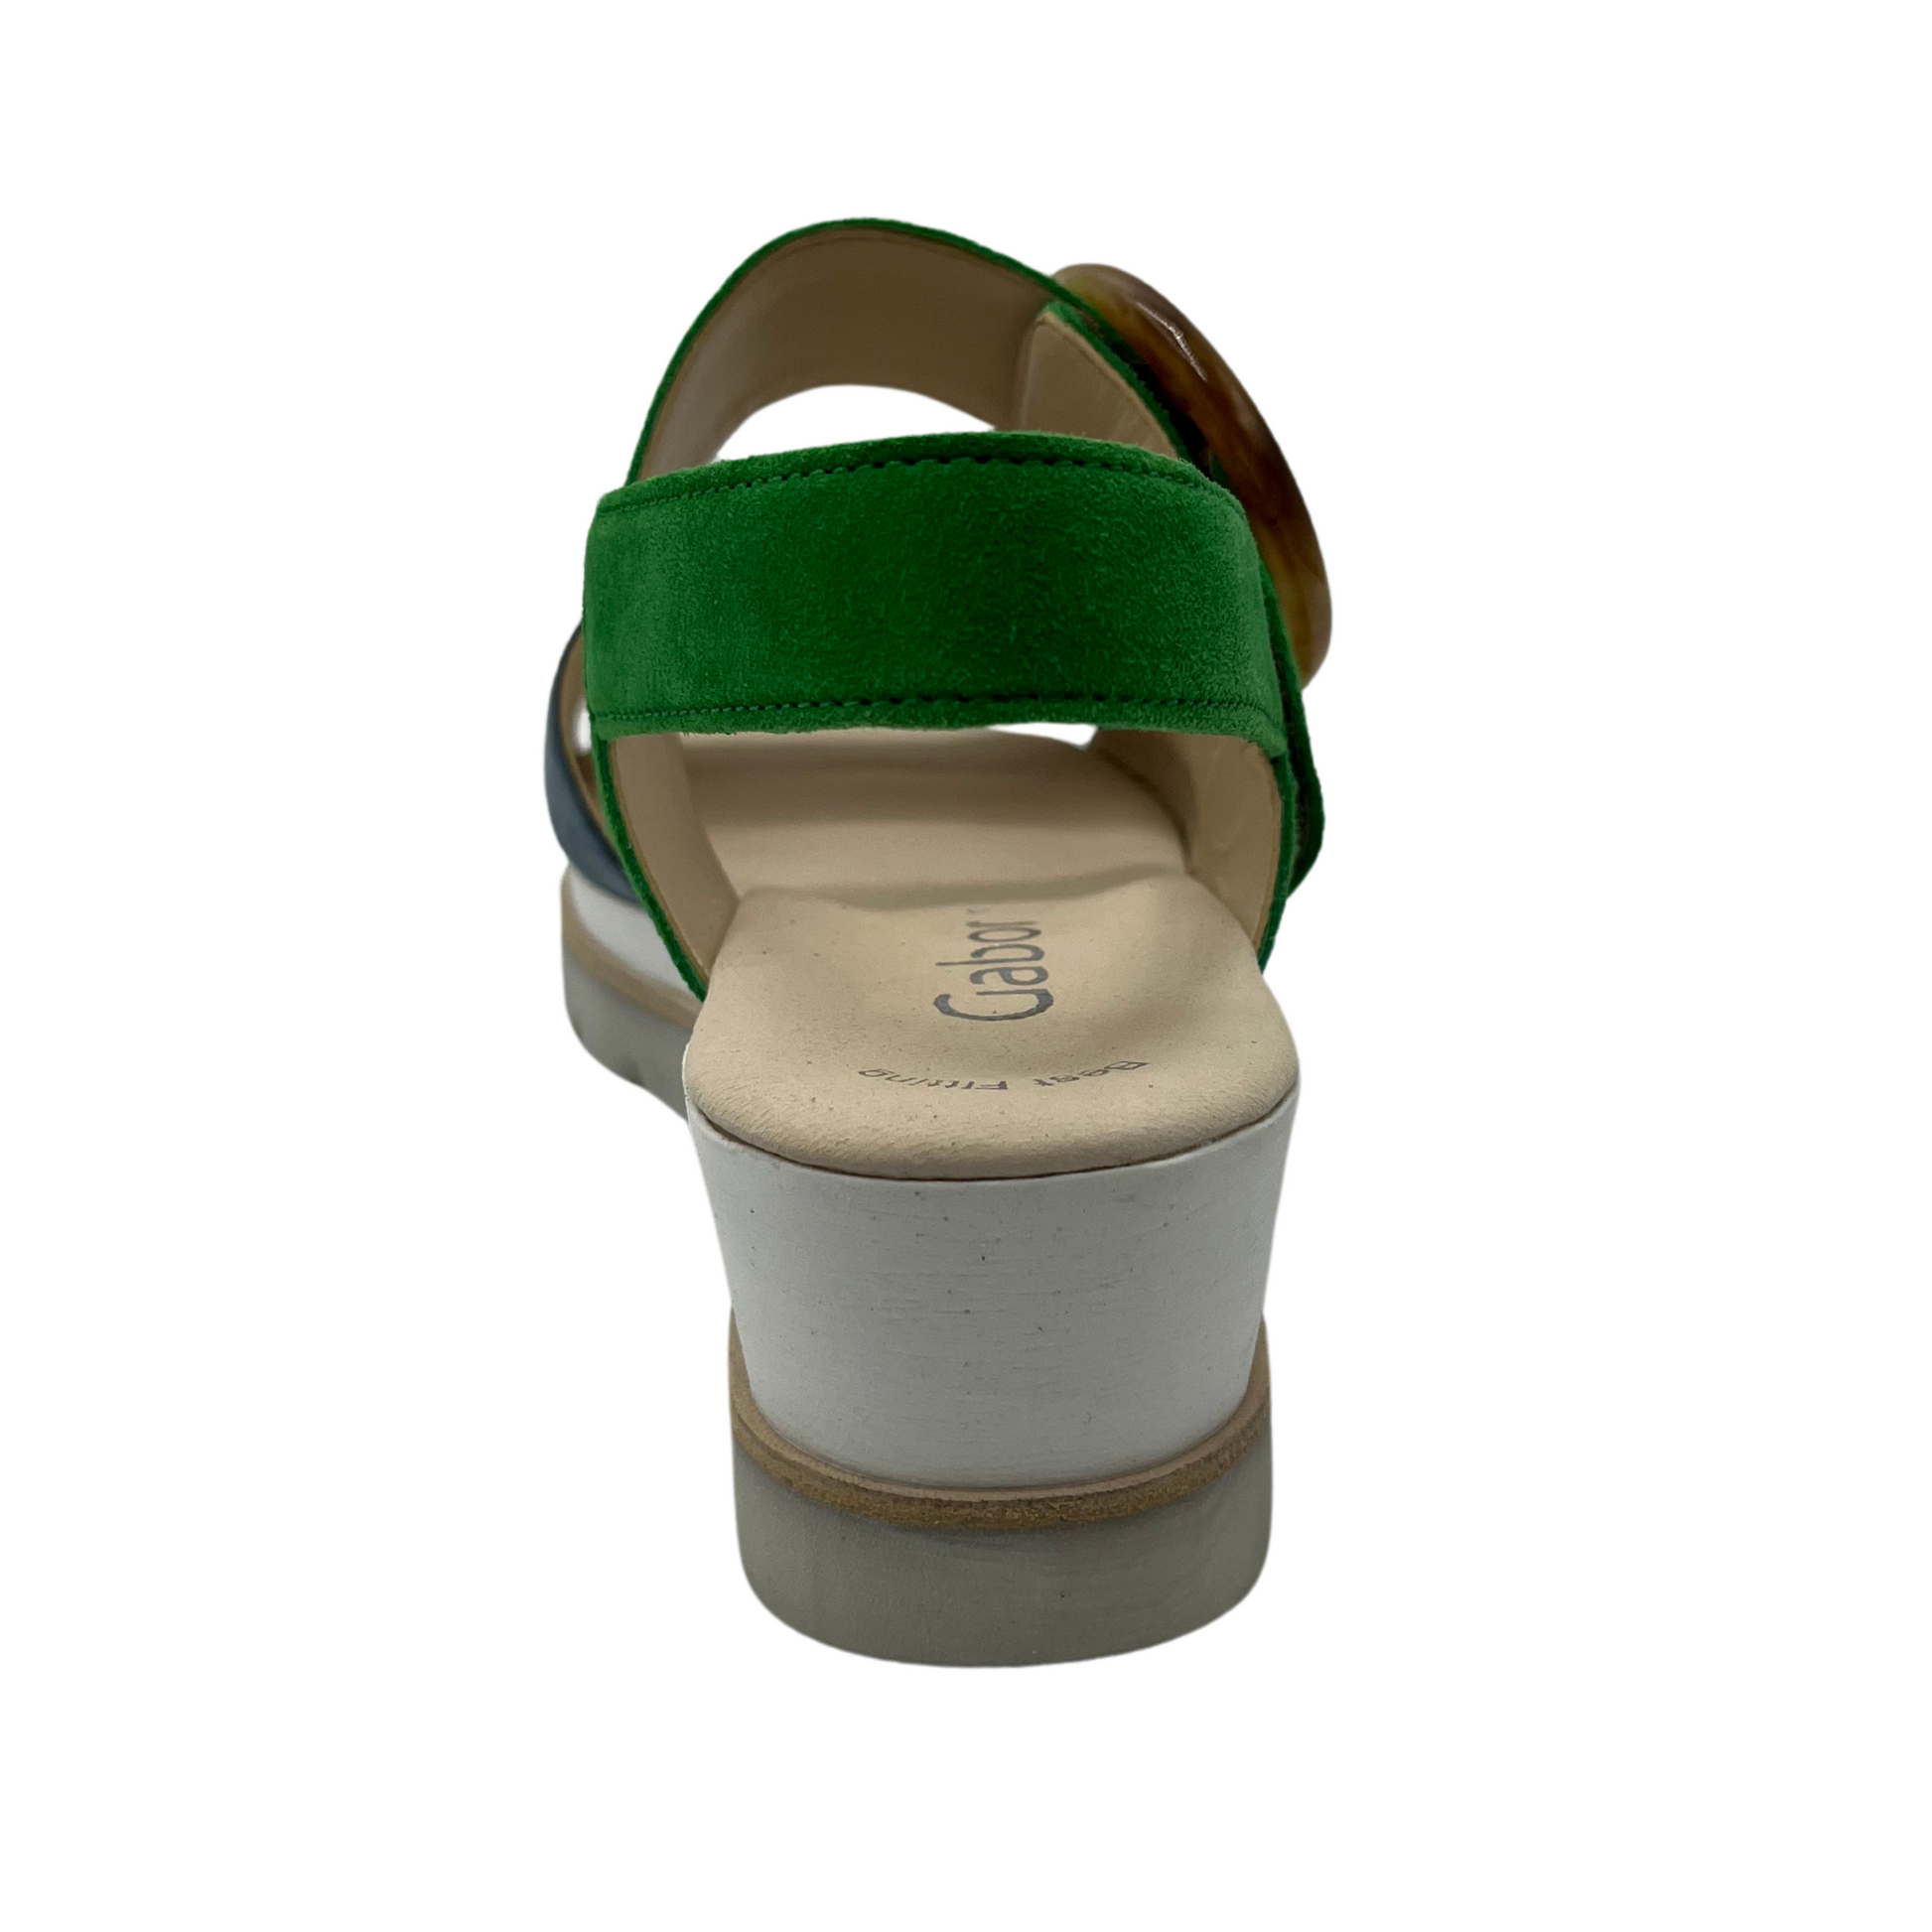 Back facing view of green and blue wedge sandal with buckle on top strap